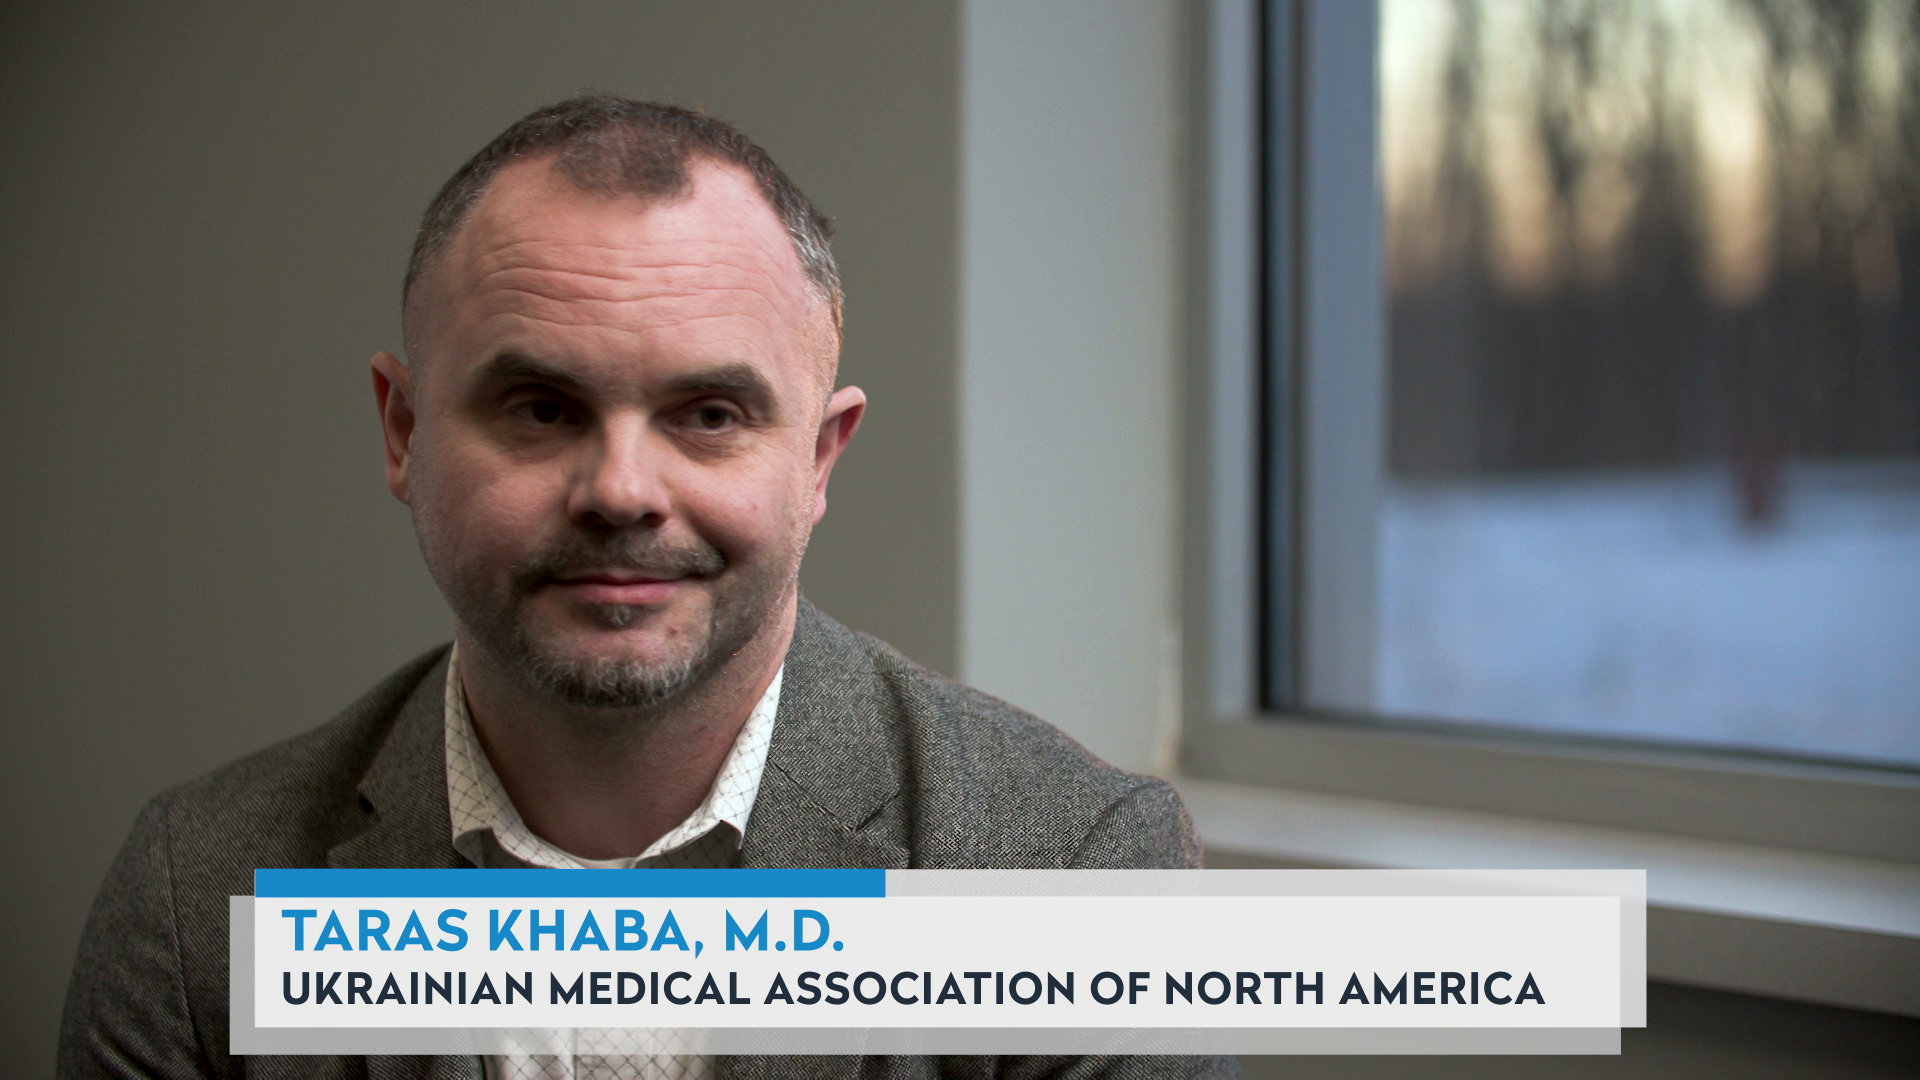 Taras Khaba sits in a room with a window behind his left shoulder, with a graphic at bottom reading "Taras Khaba, M.D." and "Ukrainian Medical Association of North America."